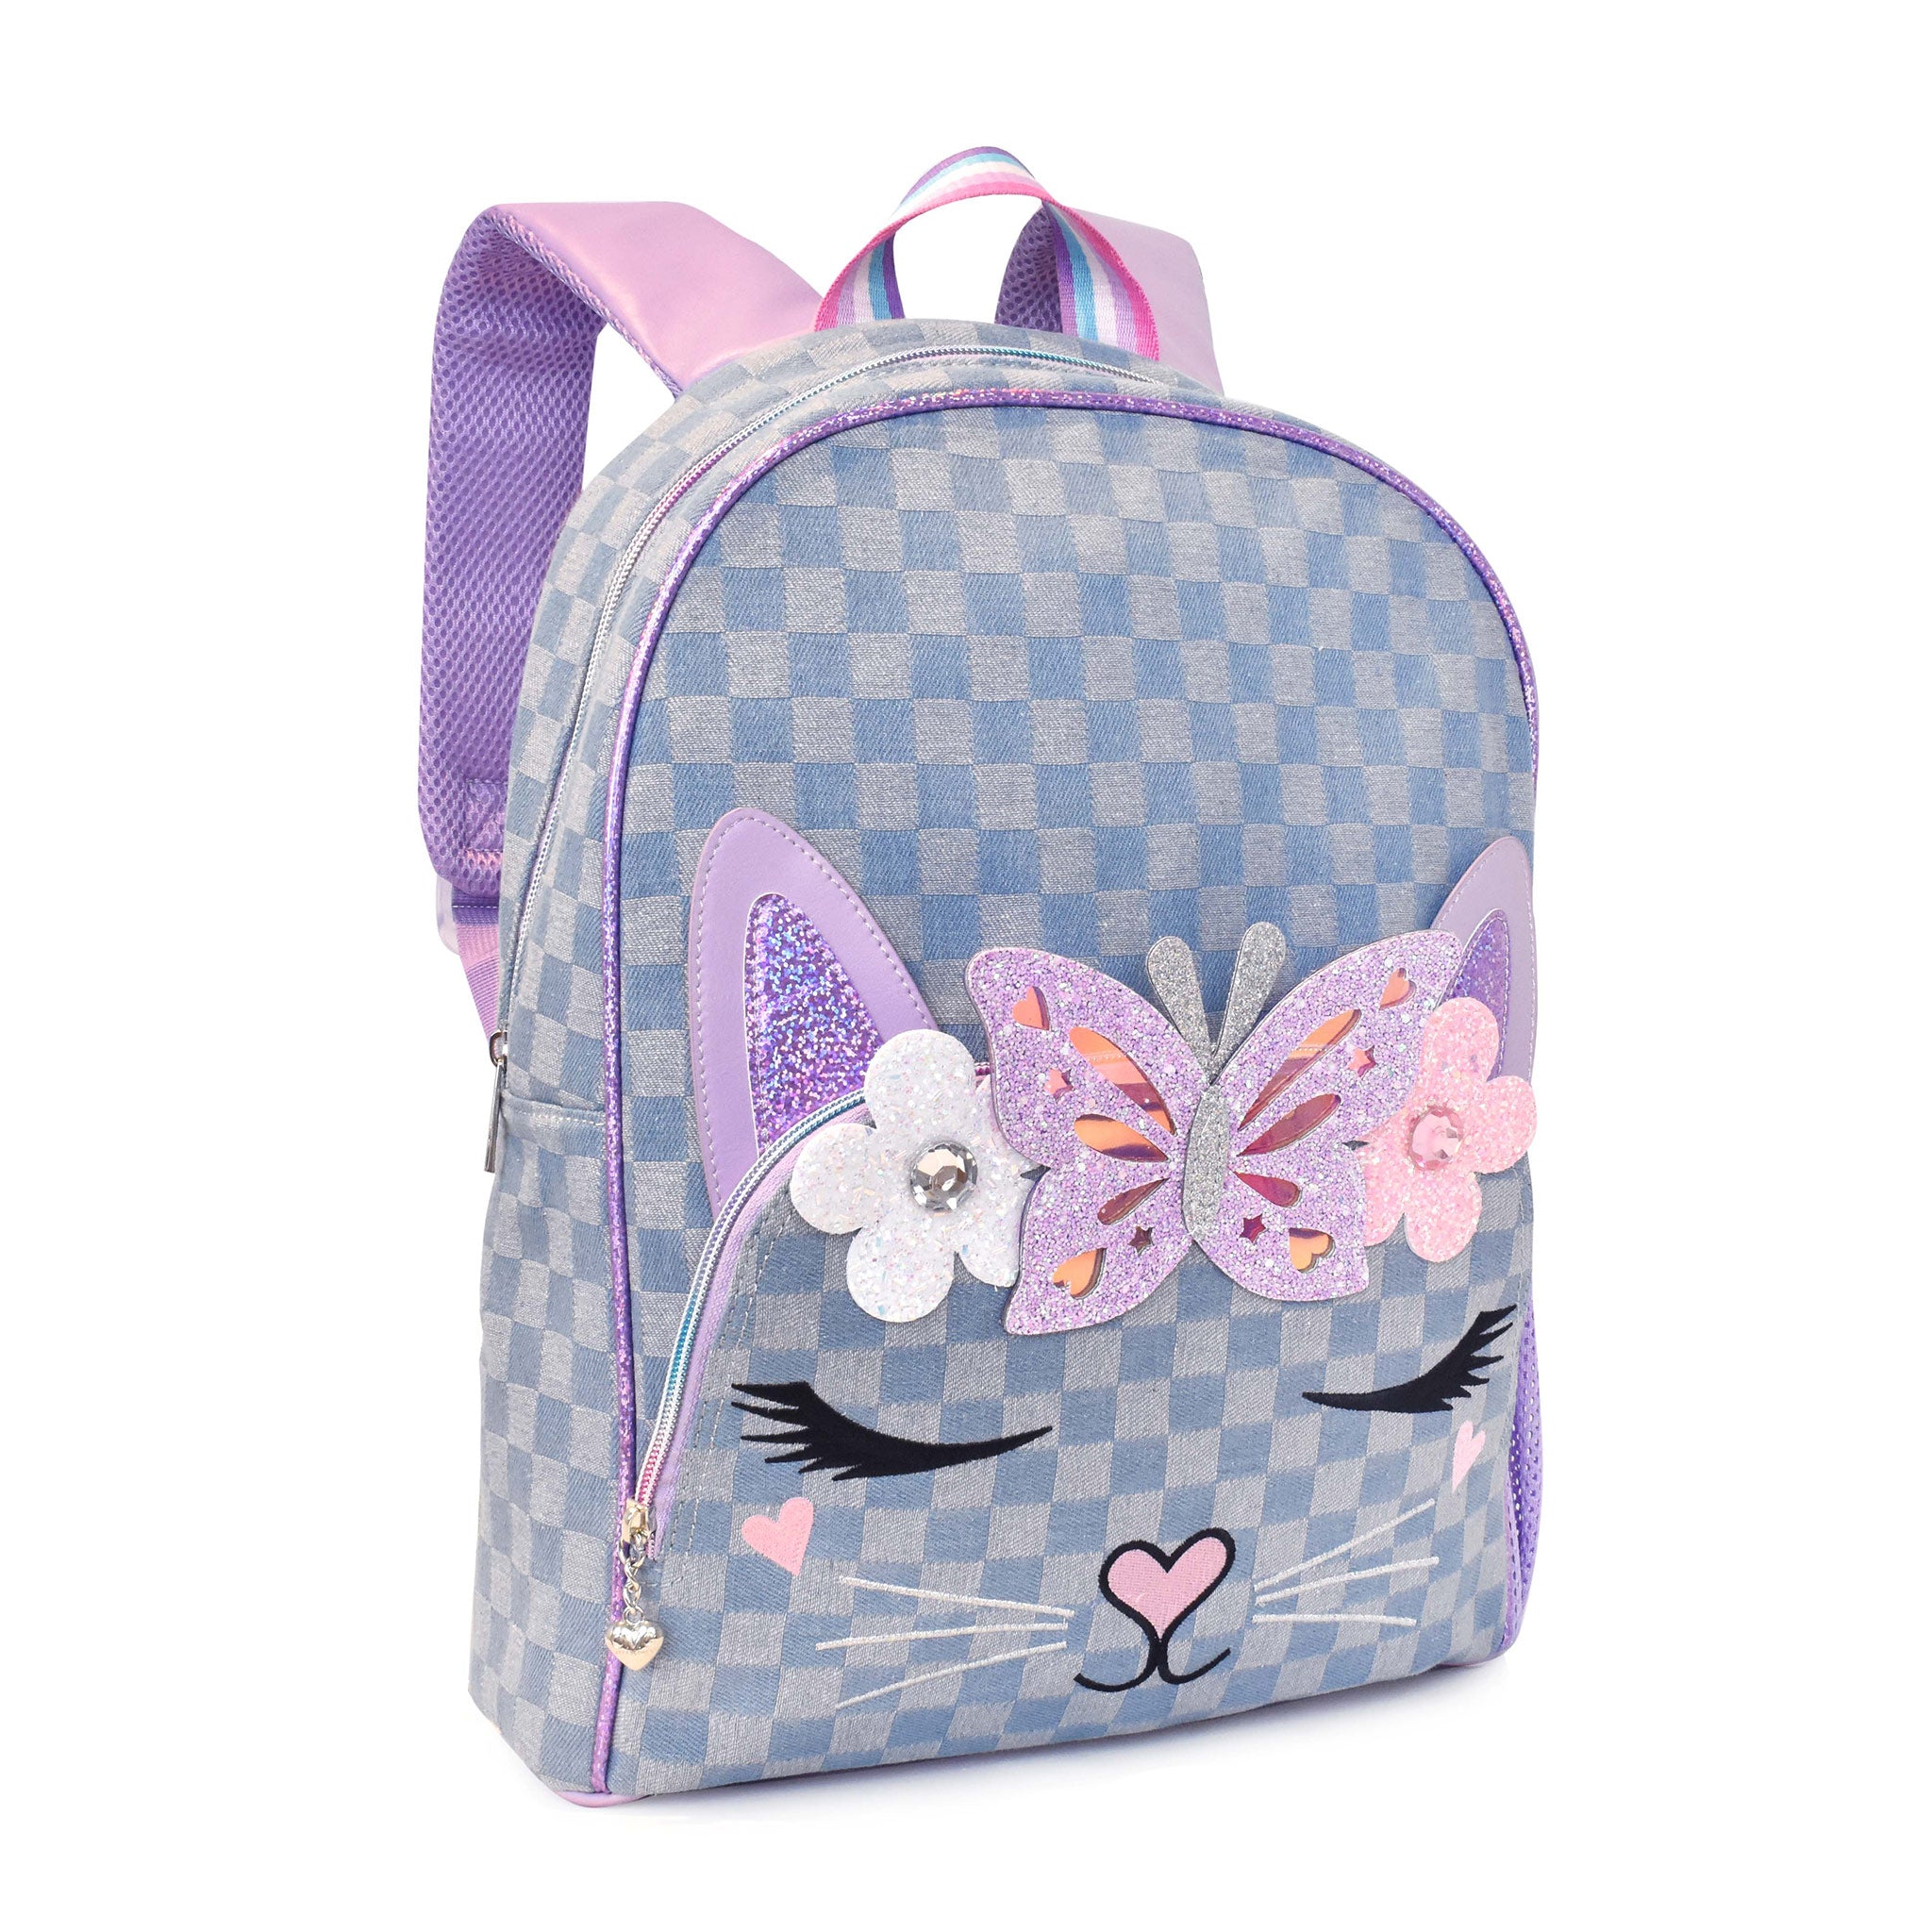 Side view of a denim checkerboard print large backpack featuring a kitty cat face with a glitter butterfly crown